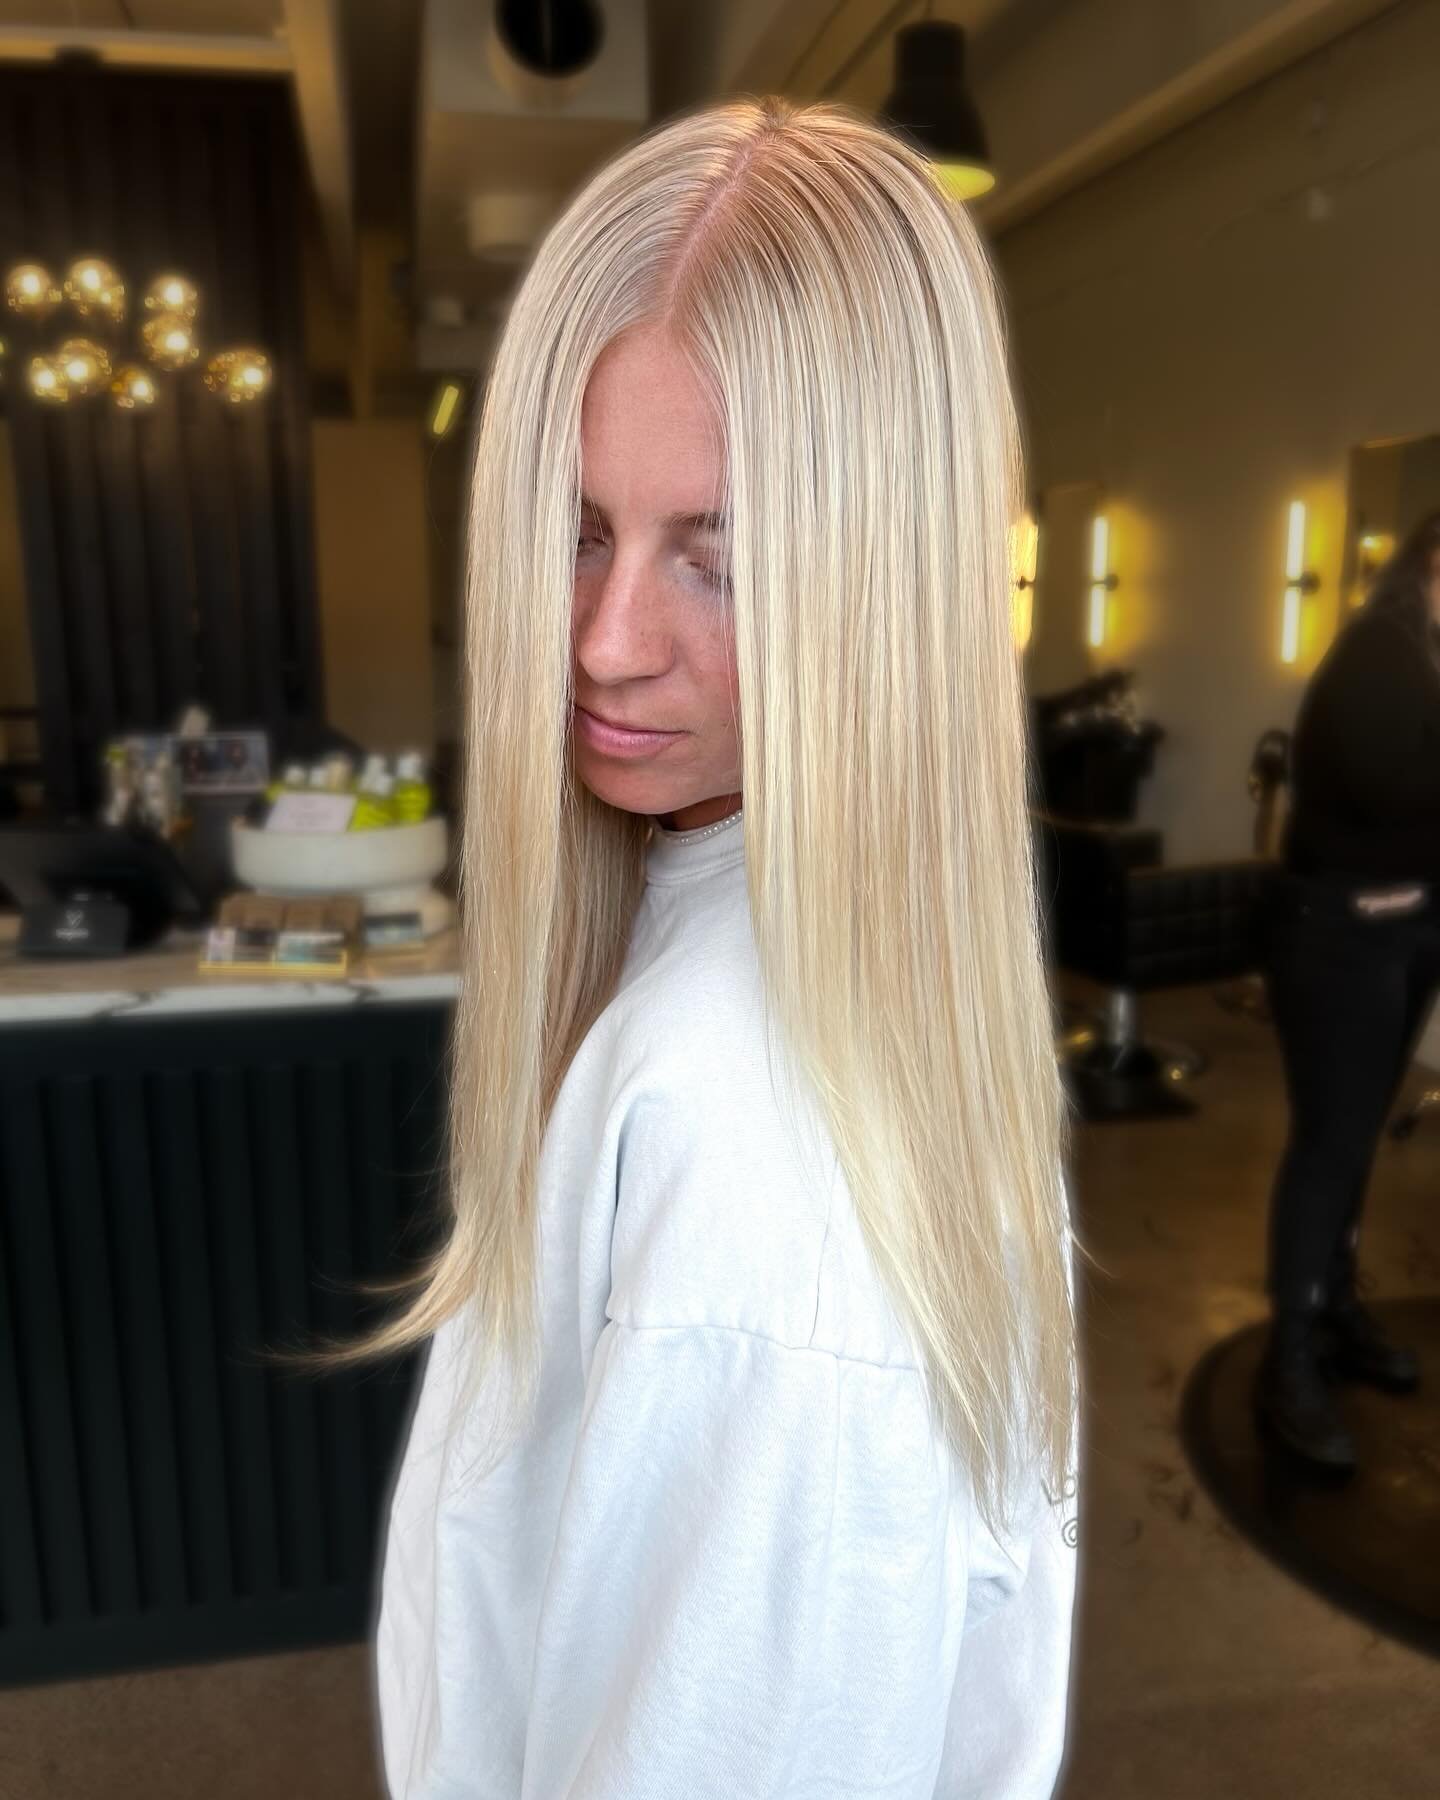 Turn heads with this dazzling platinum full highlight, expertly crafted by our color guru, Gabriella! 💖✨ Elevate your style to pure radiance and let your locks shine as bright as your personality. 

Book your complimentary consultation with Gabriell